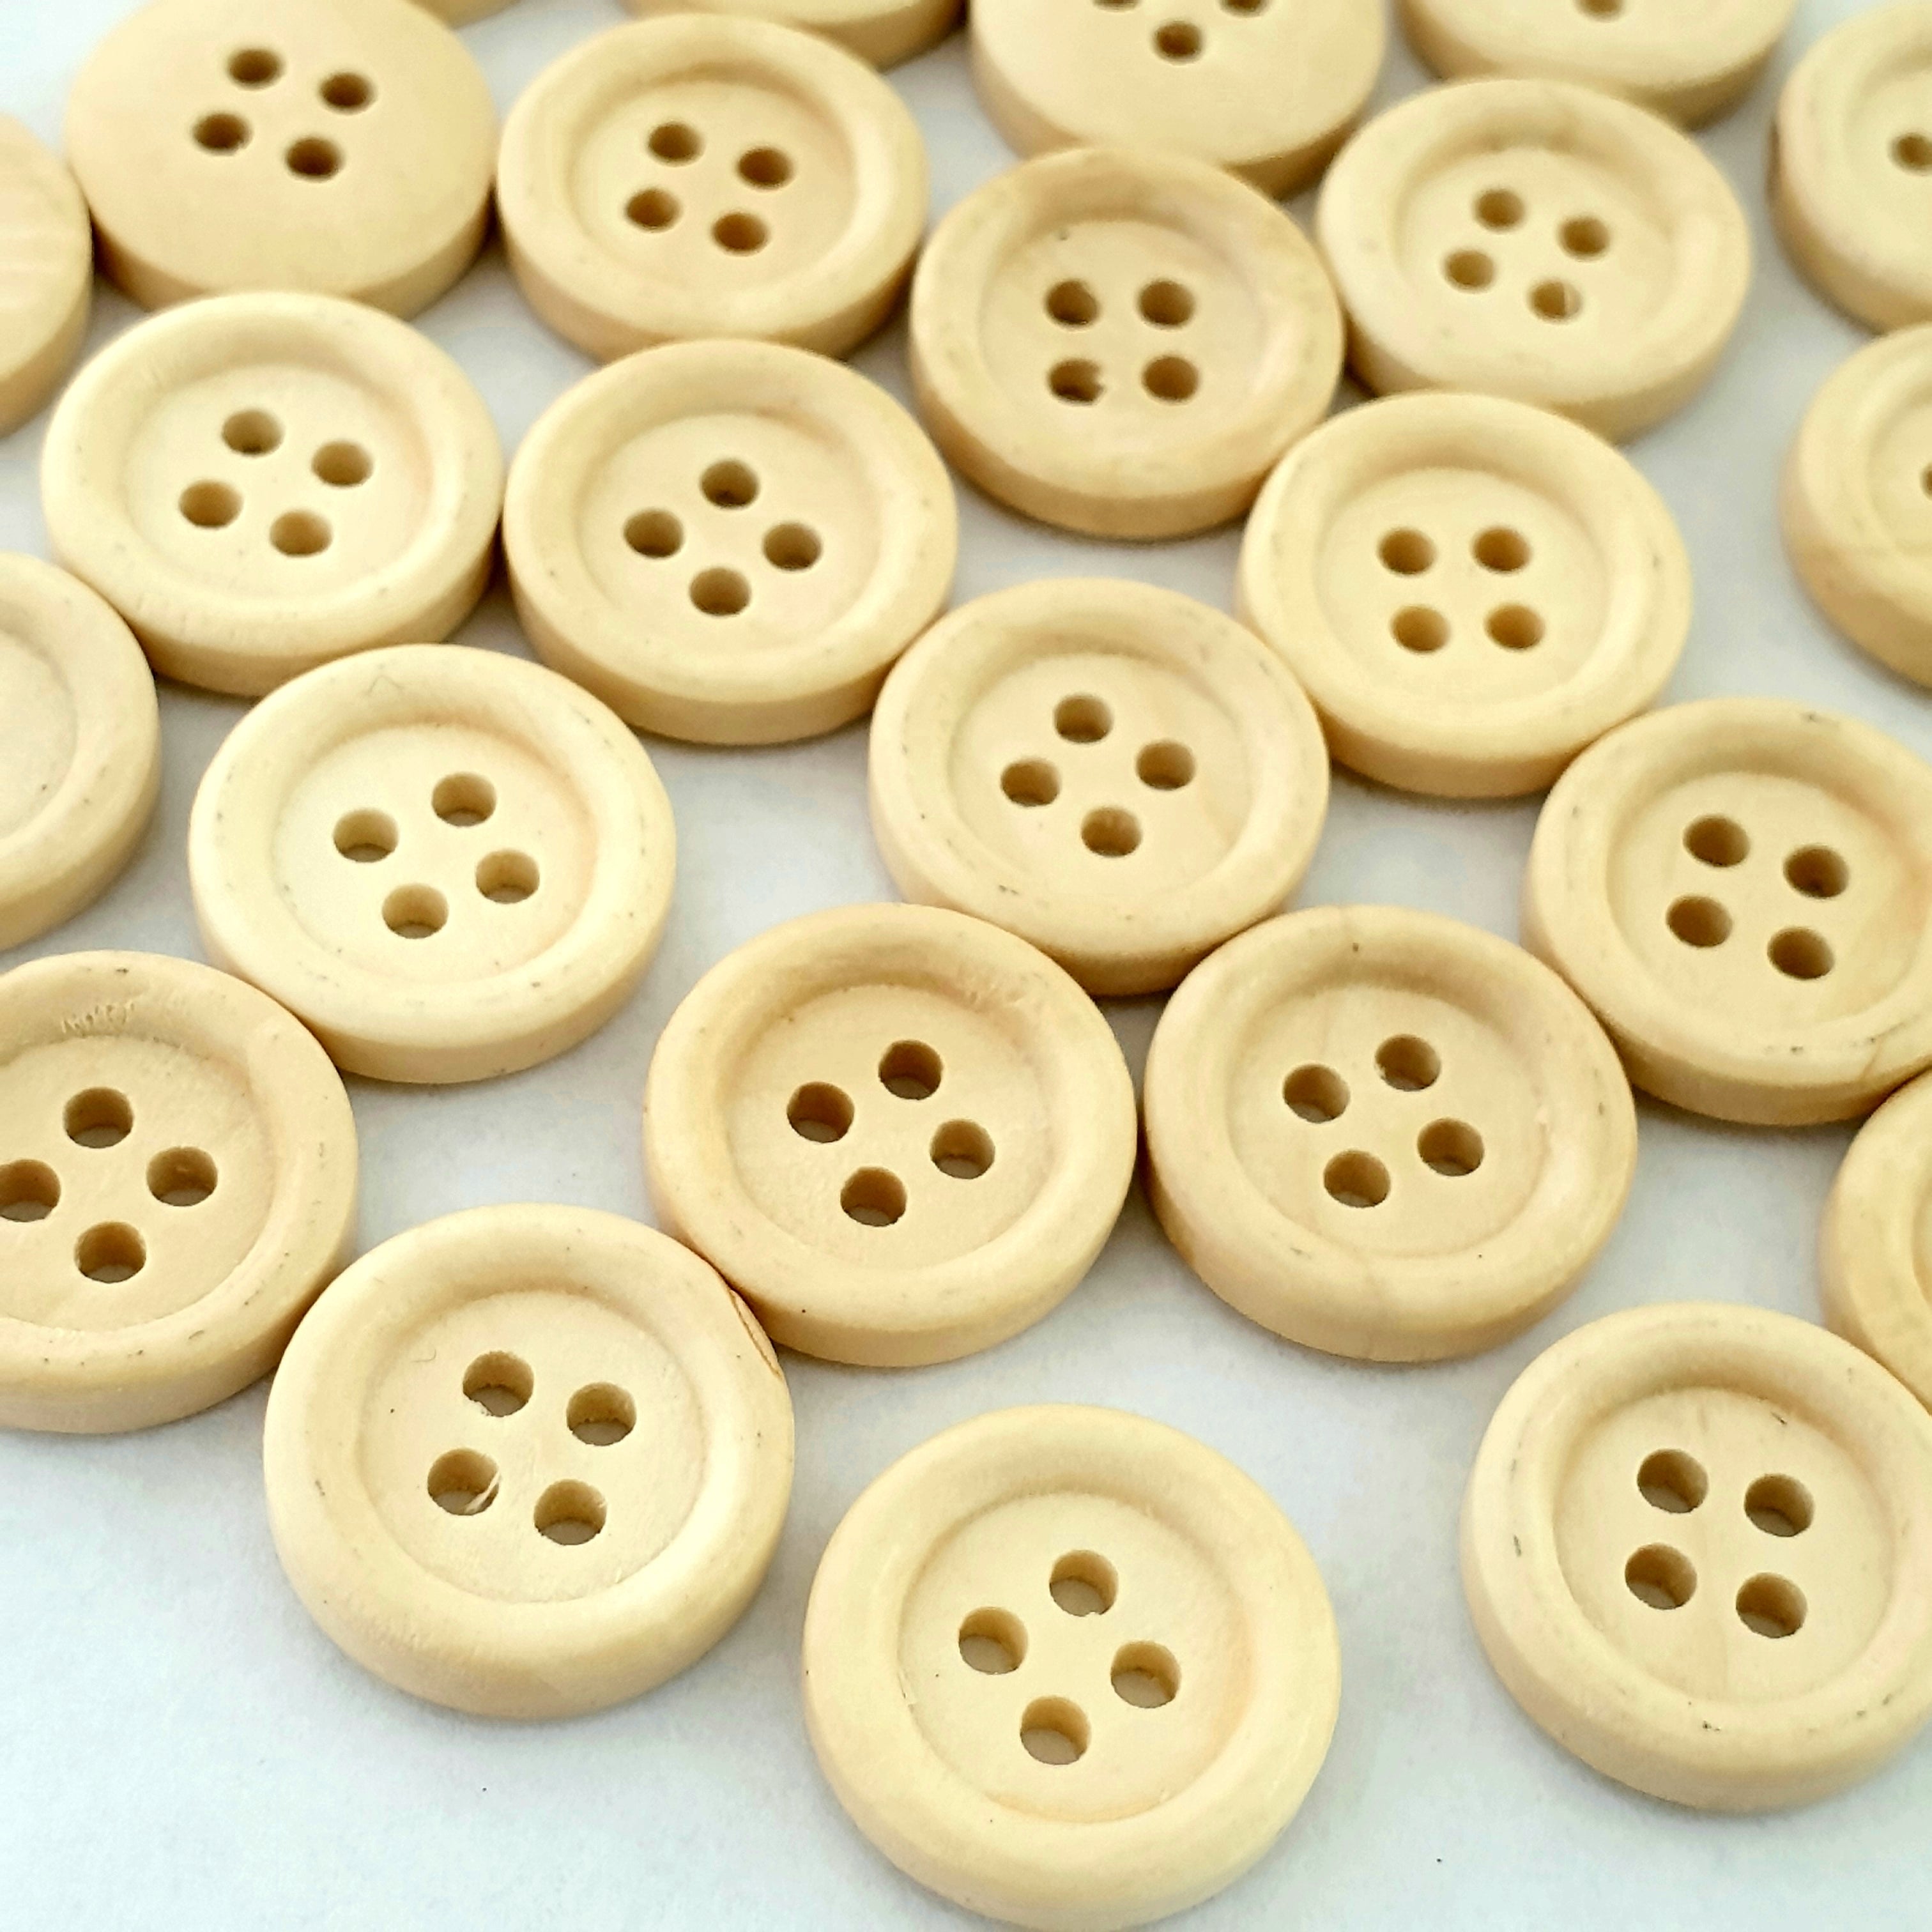 MajorCrafts 44pcs 15mm Light Brown Round 4 Holes Wooden Sewing Buttons